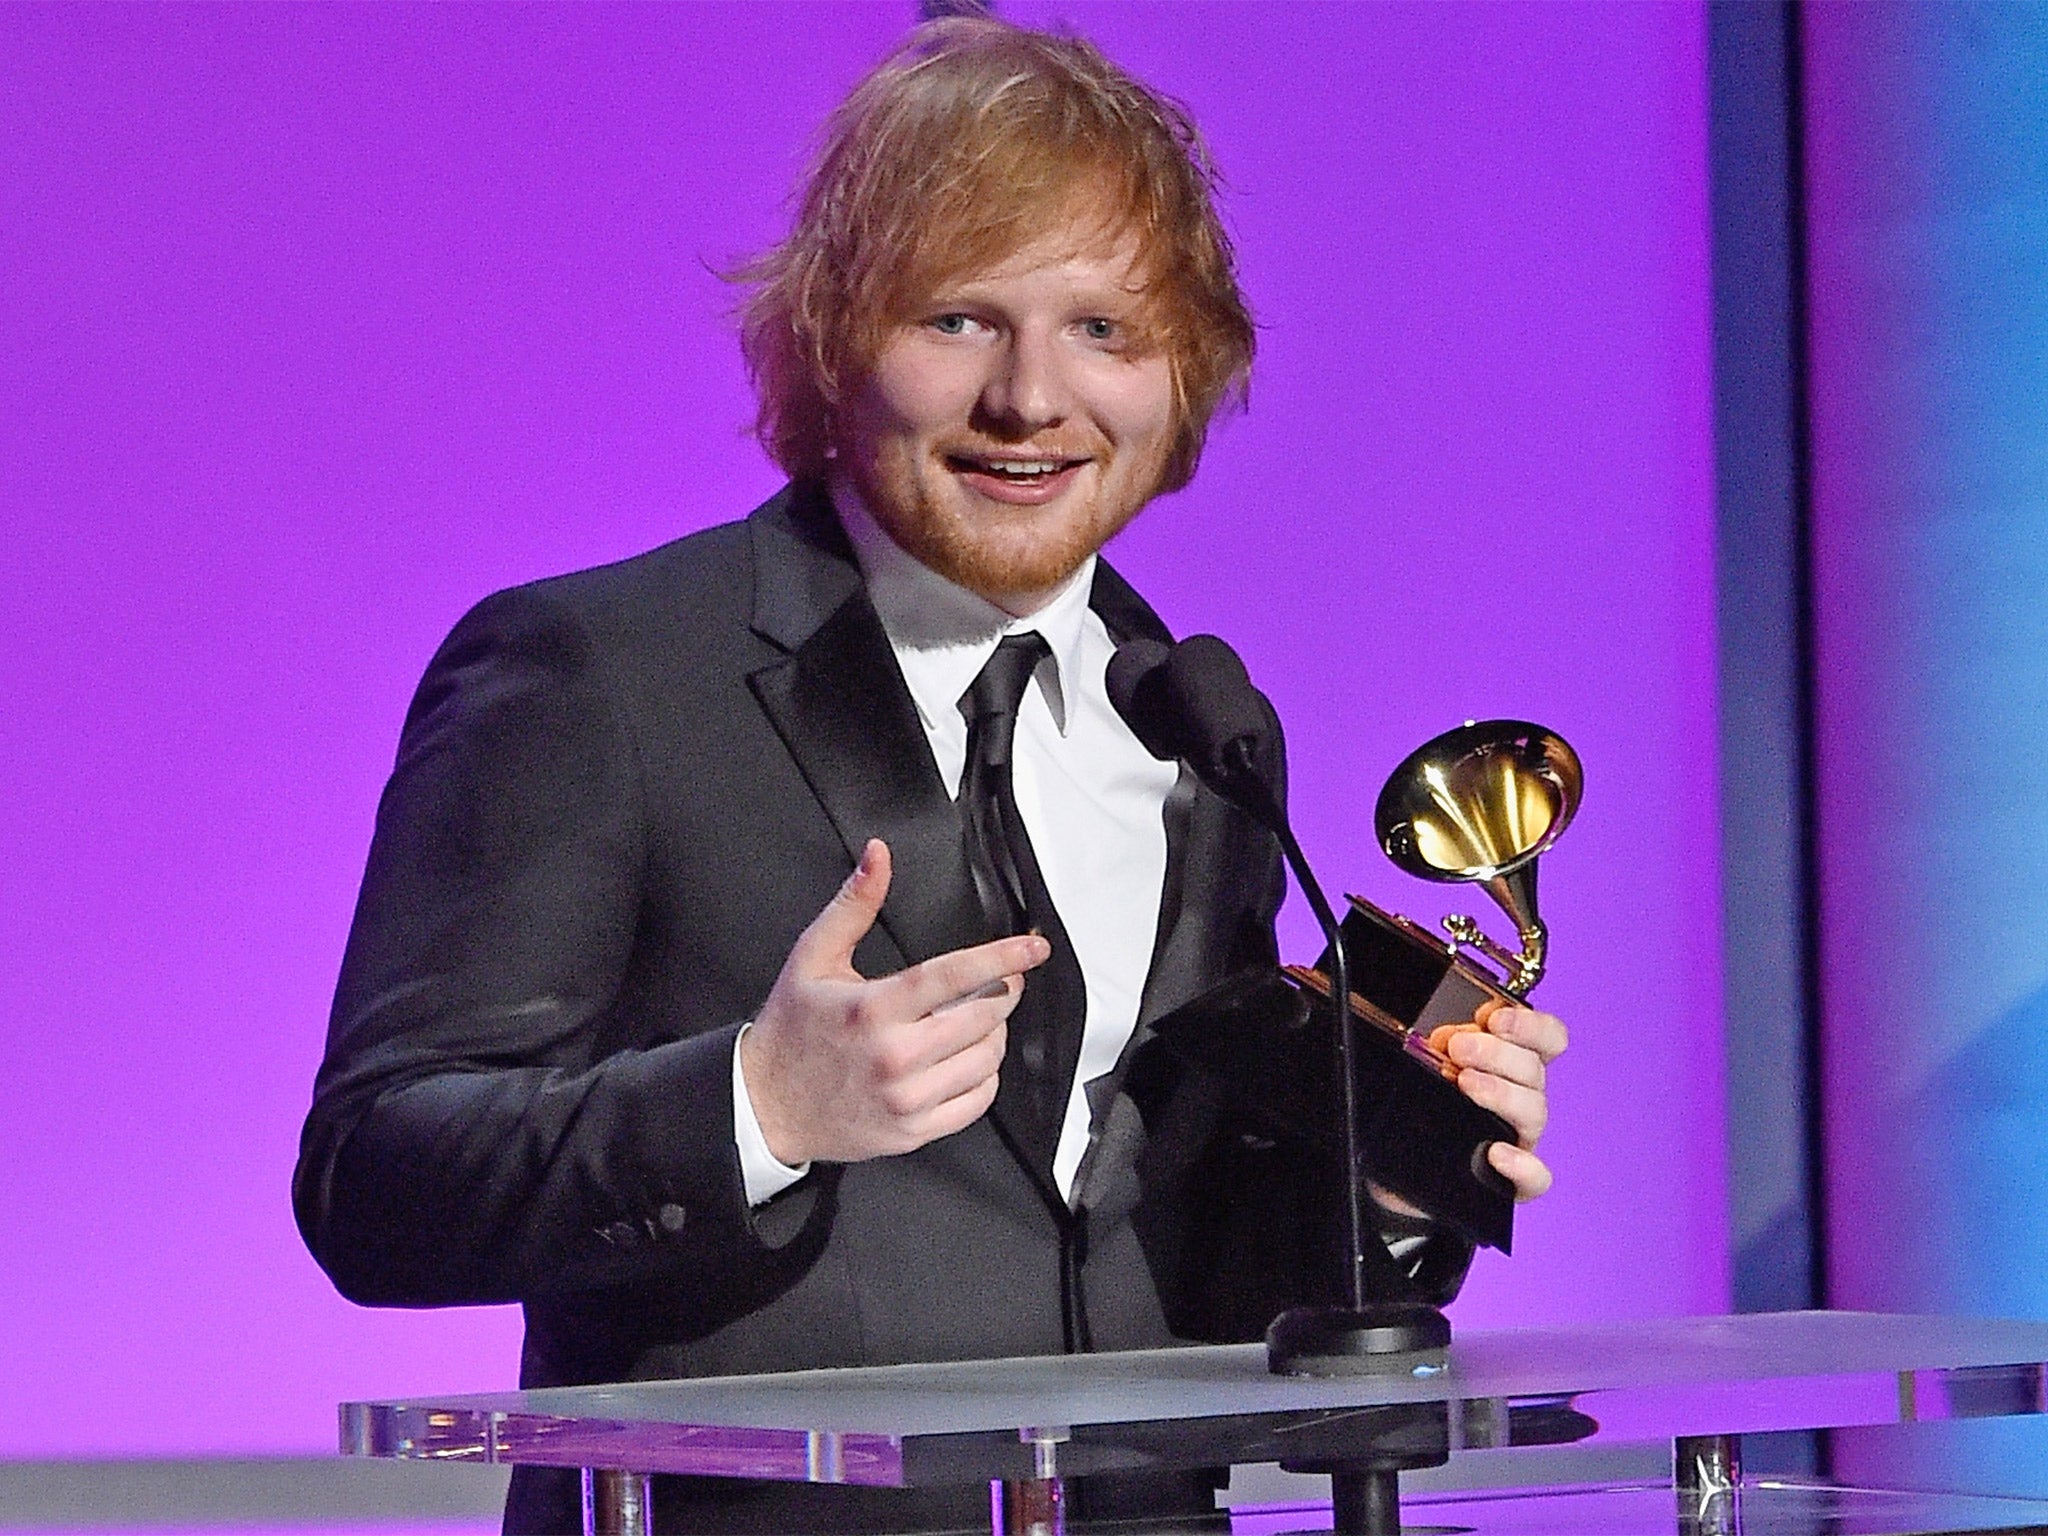 Ed Sheeran receives the gong for Best Pop Solo Performance, for "Thinking Out Loud," at the Grammys on Monday night